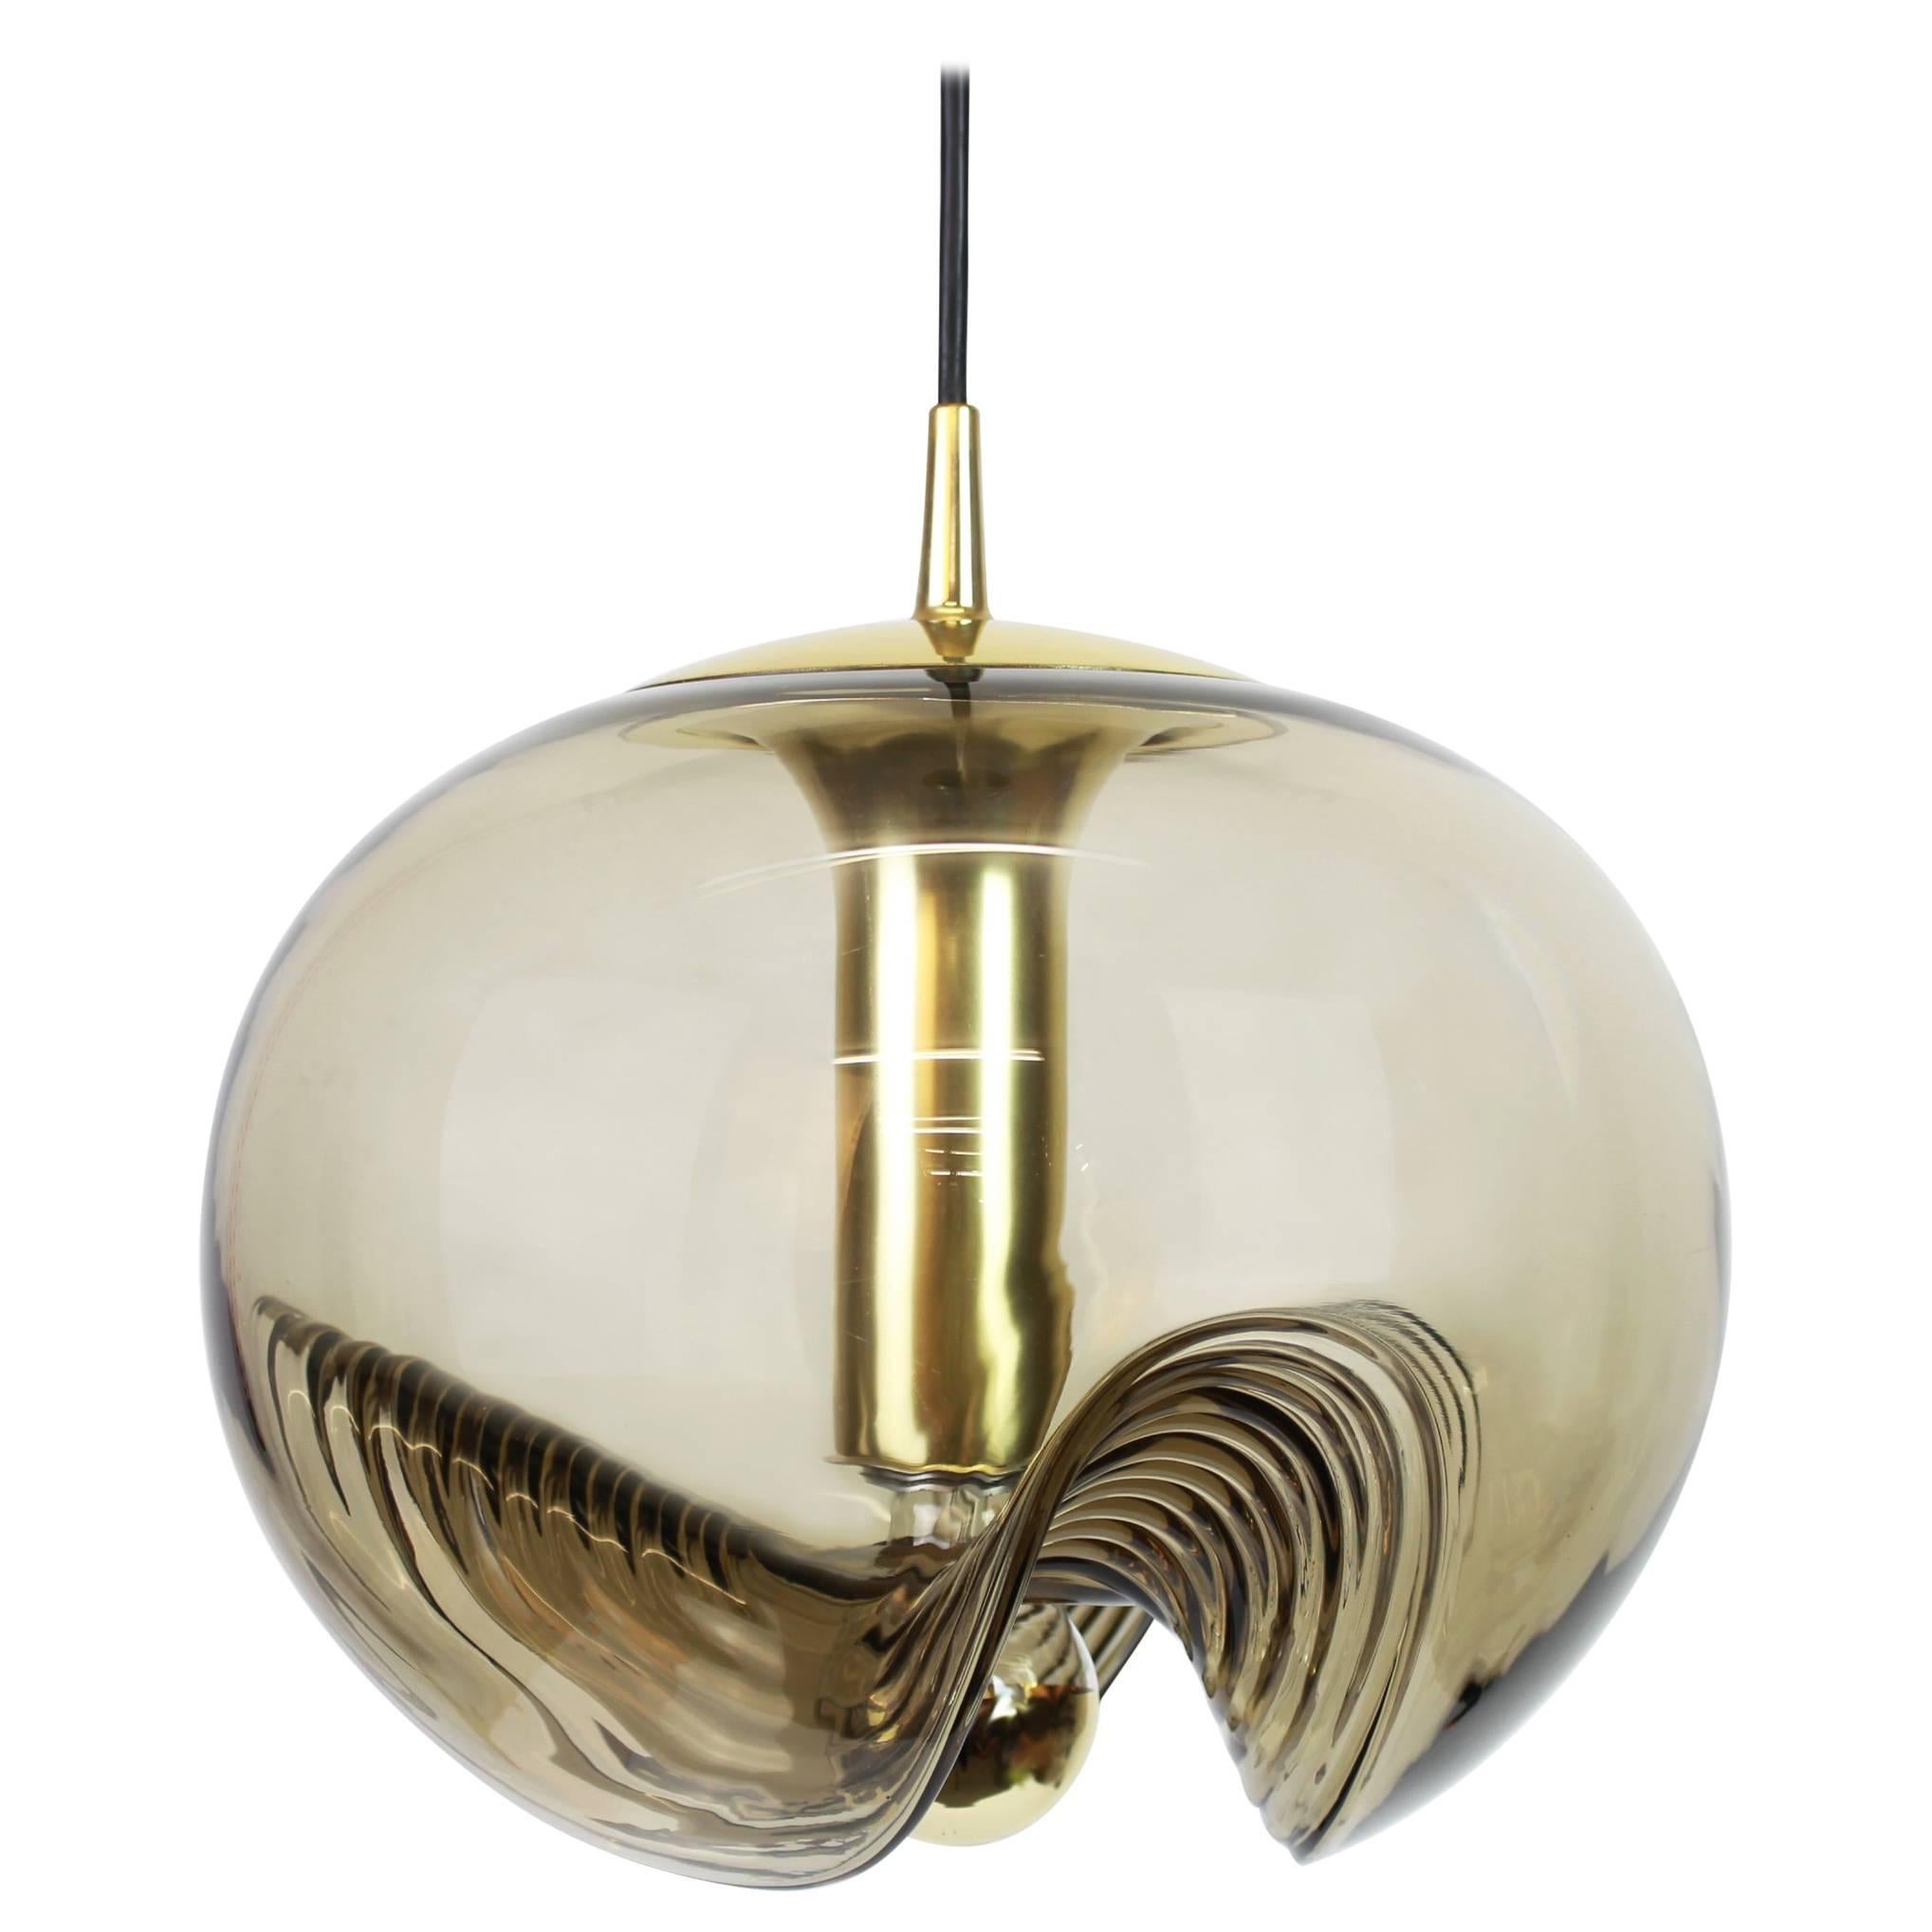 A special round biomorphic smoked glass pendant designed by Koch & Lowy for Peill & Putzler, manufactured in Germany, circa 1970s.

Sockets: 1 x E27 standard bulb. (100 W max).

Drop rod can be adjusted as required, free of charge, for greater